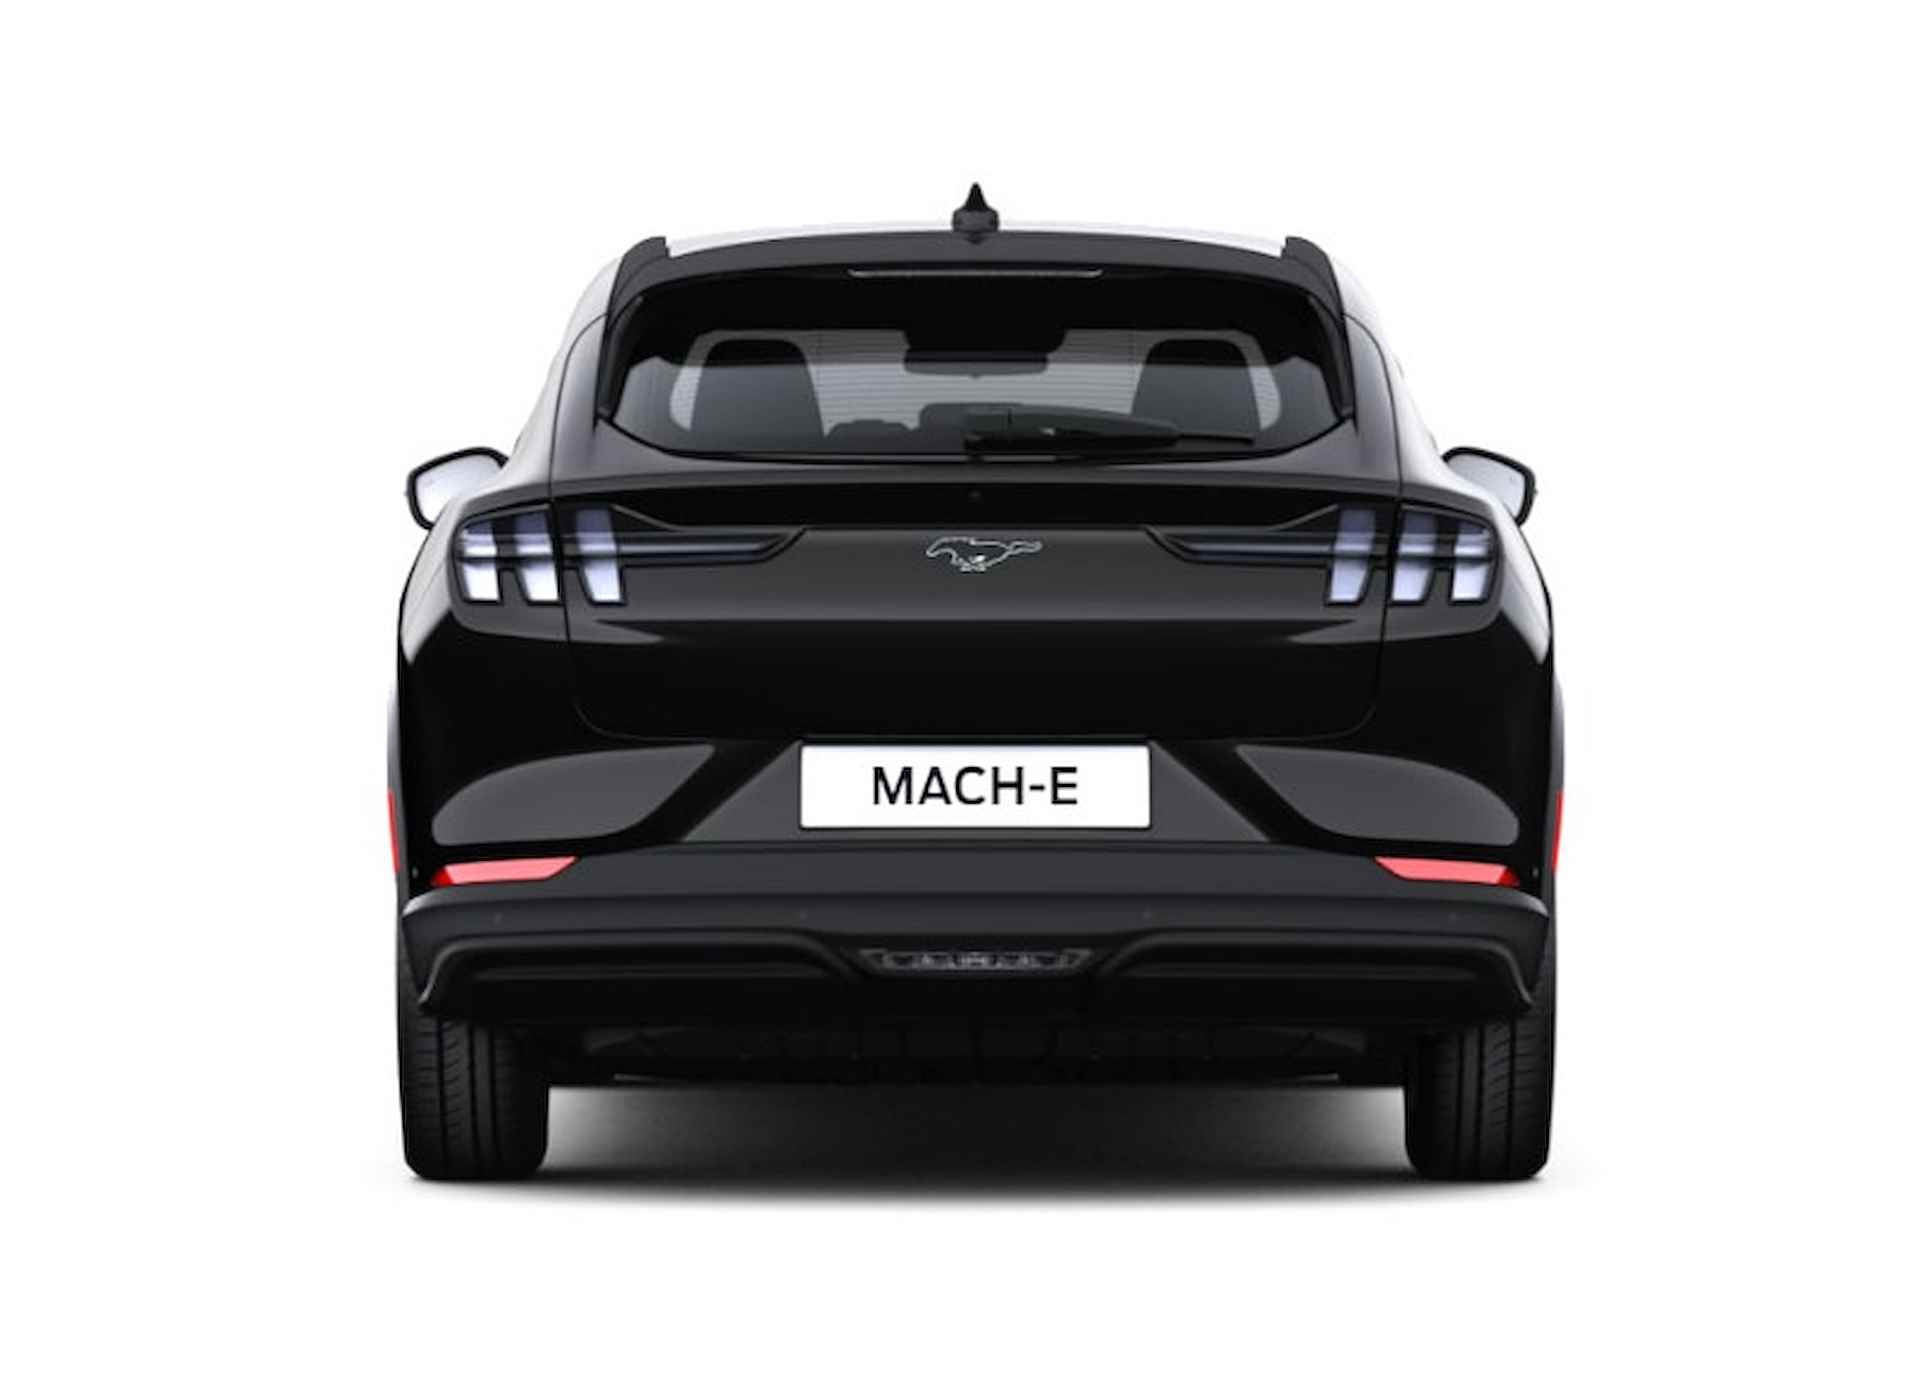 Ford Mustang Mach-E 75kWh RWD | Ford Private Lease Va. € 589 p/m | Ford Operational Lease Va. € 564 p/m |  10,2 inch digitaal instrumentenpaneel | One Pedal Drive | - 7/14